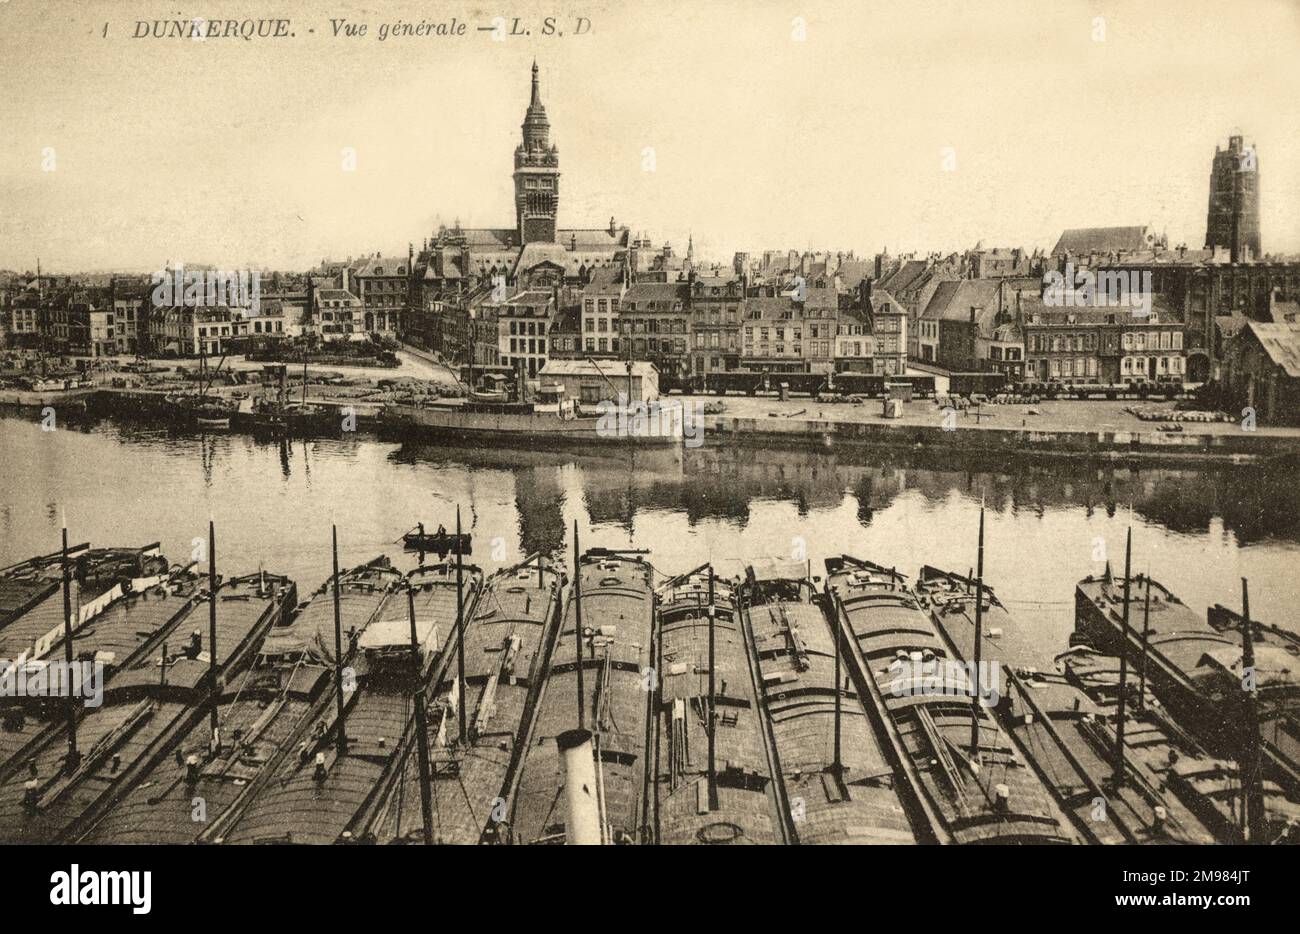 Dunkirk, France - a view out over the harbour, showing tethered fishing boats in the foreground and the town hall a a church belfry in the distance. Stock Photo